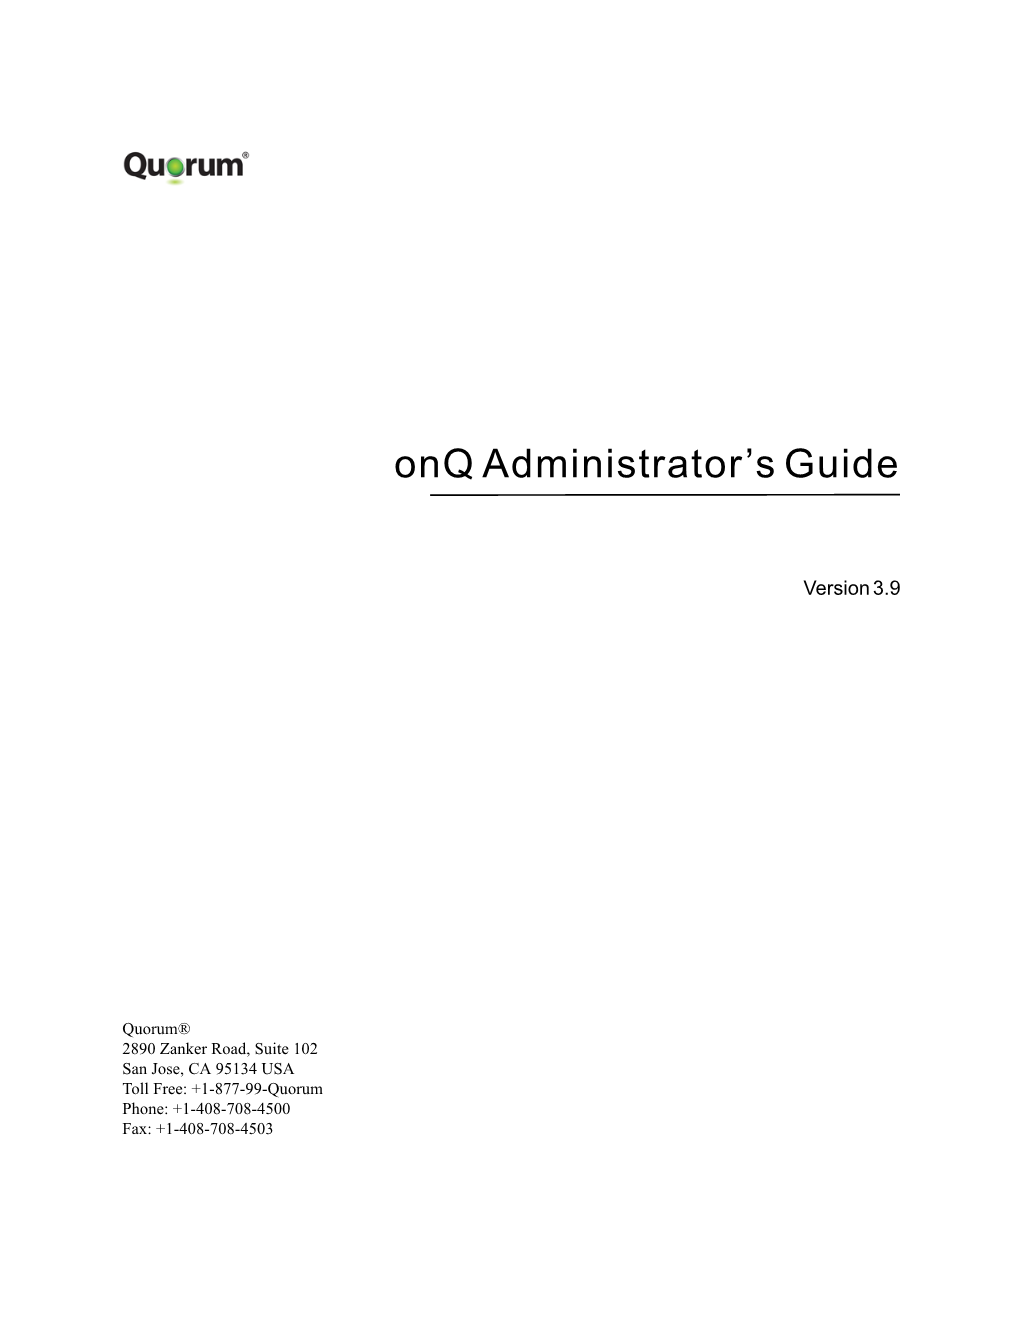 Onq Administrator's Guide